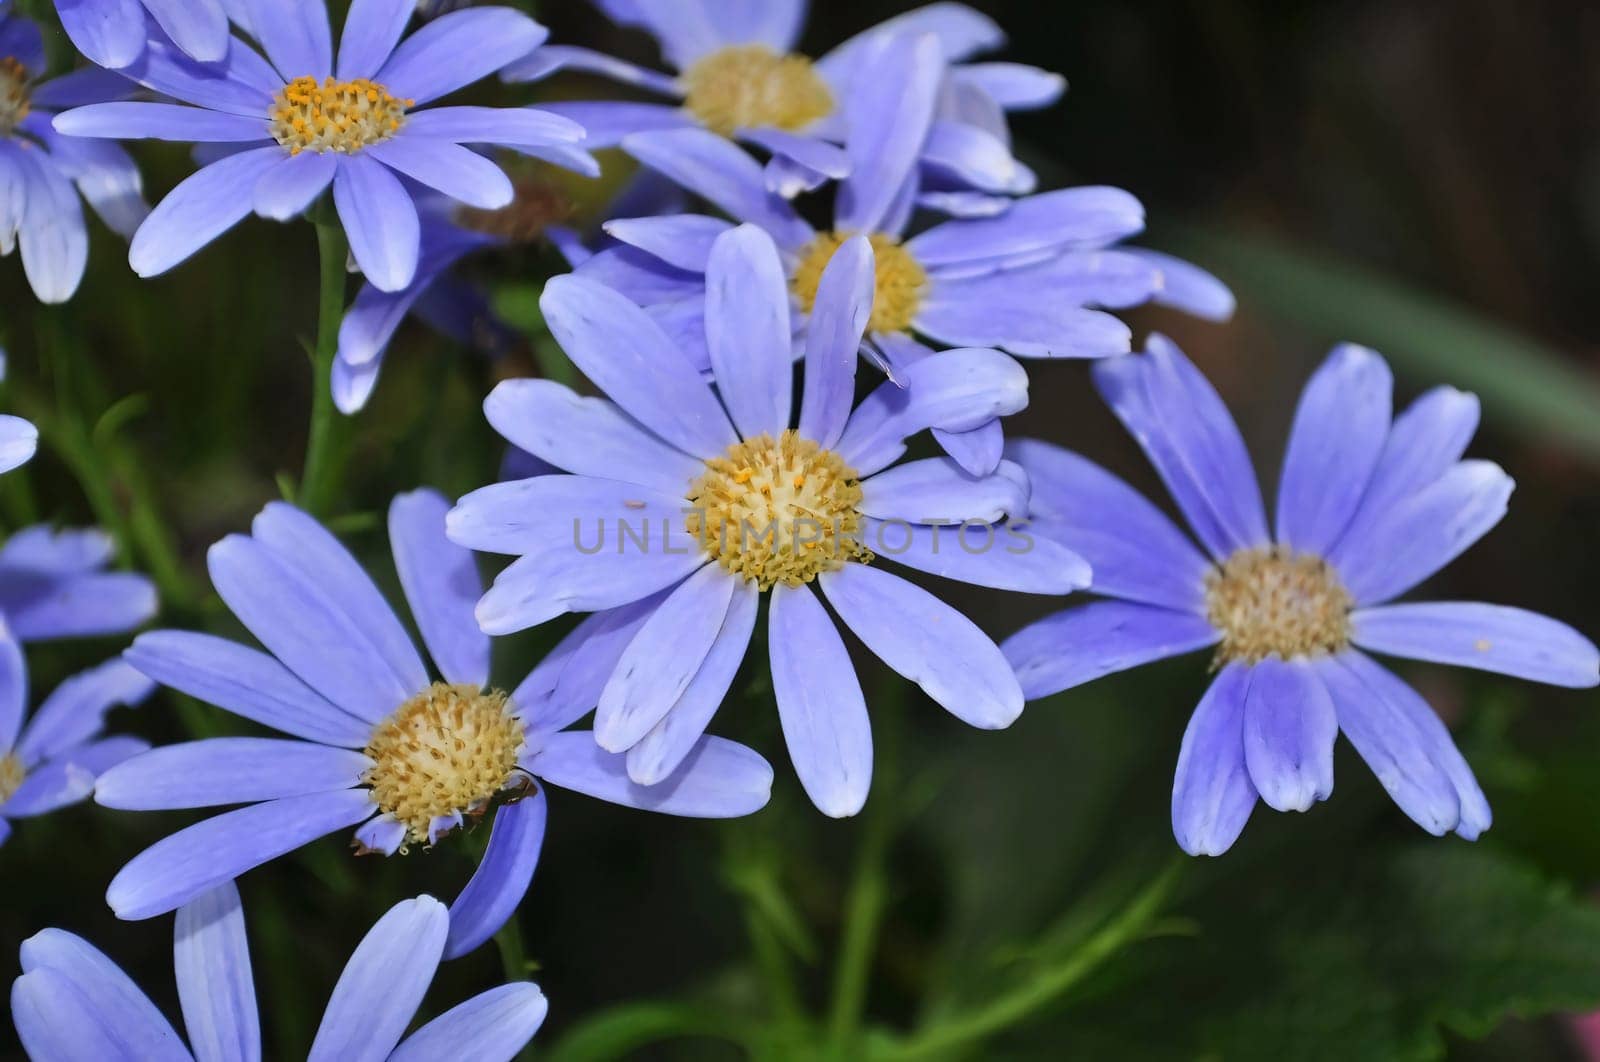 Purple swan river daisy or Brachyscome iberidifolia Benth, asteraceae on a sunny spring day are delicate and stunningly spectacular, beautifull flower